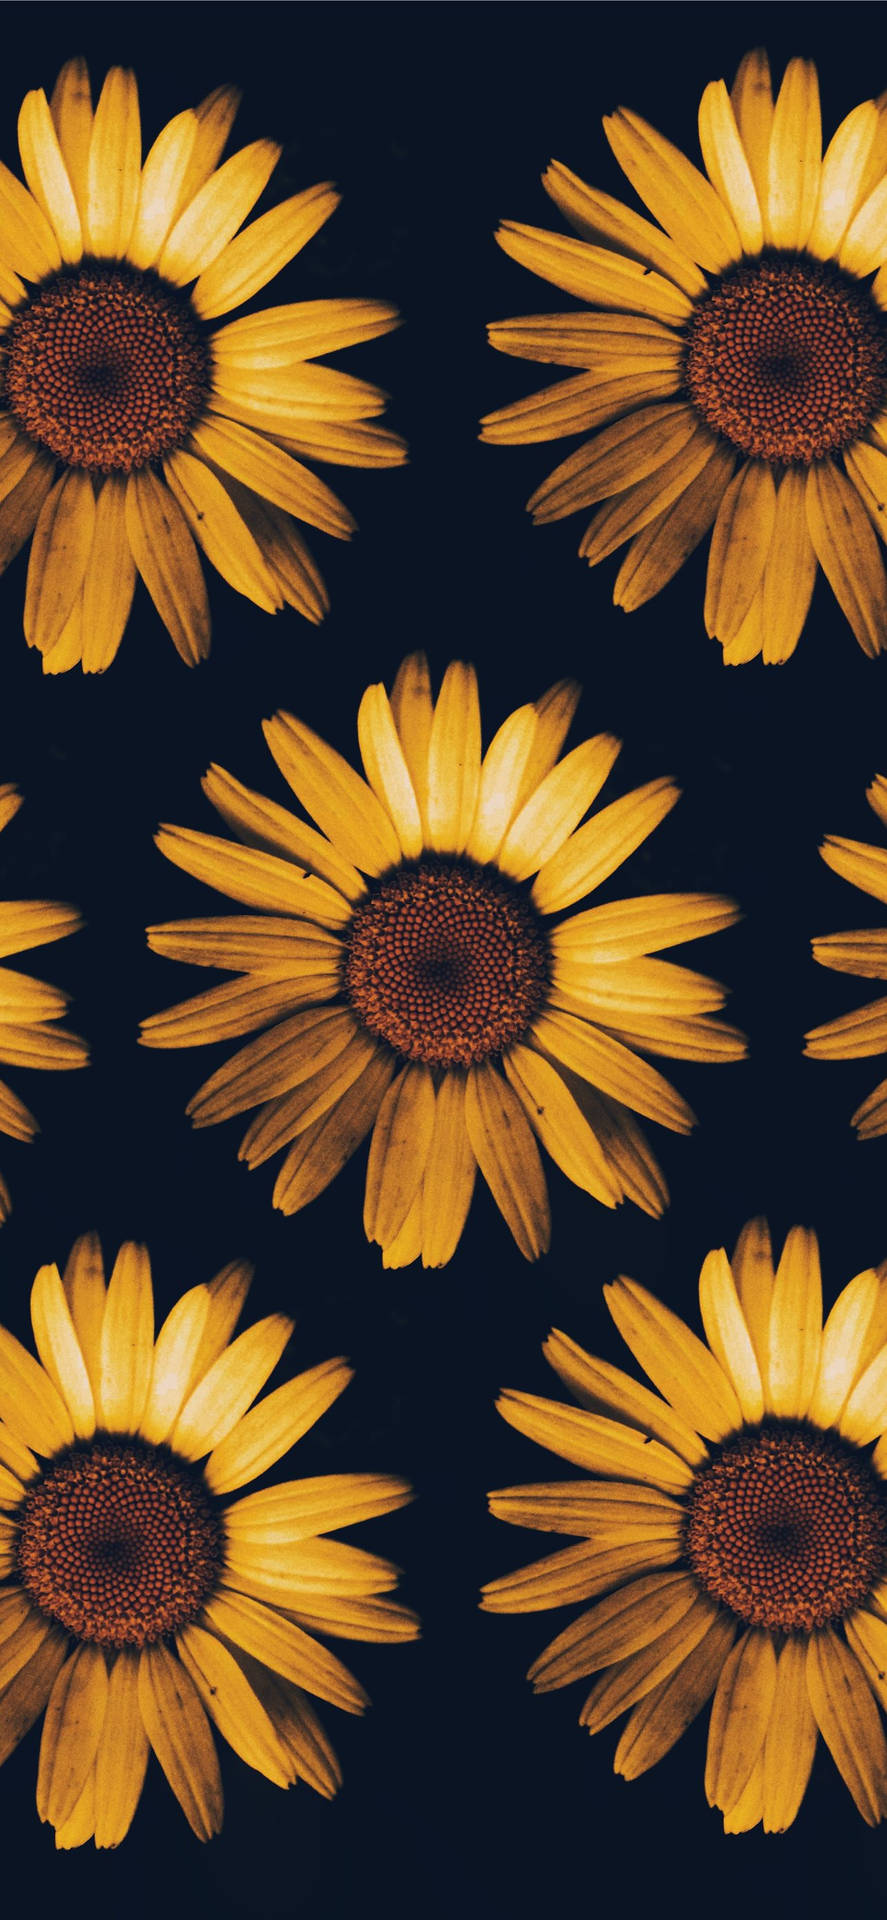 Sunflower Iphone Wallpaper Images